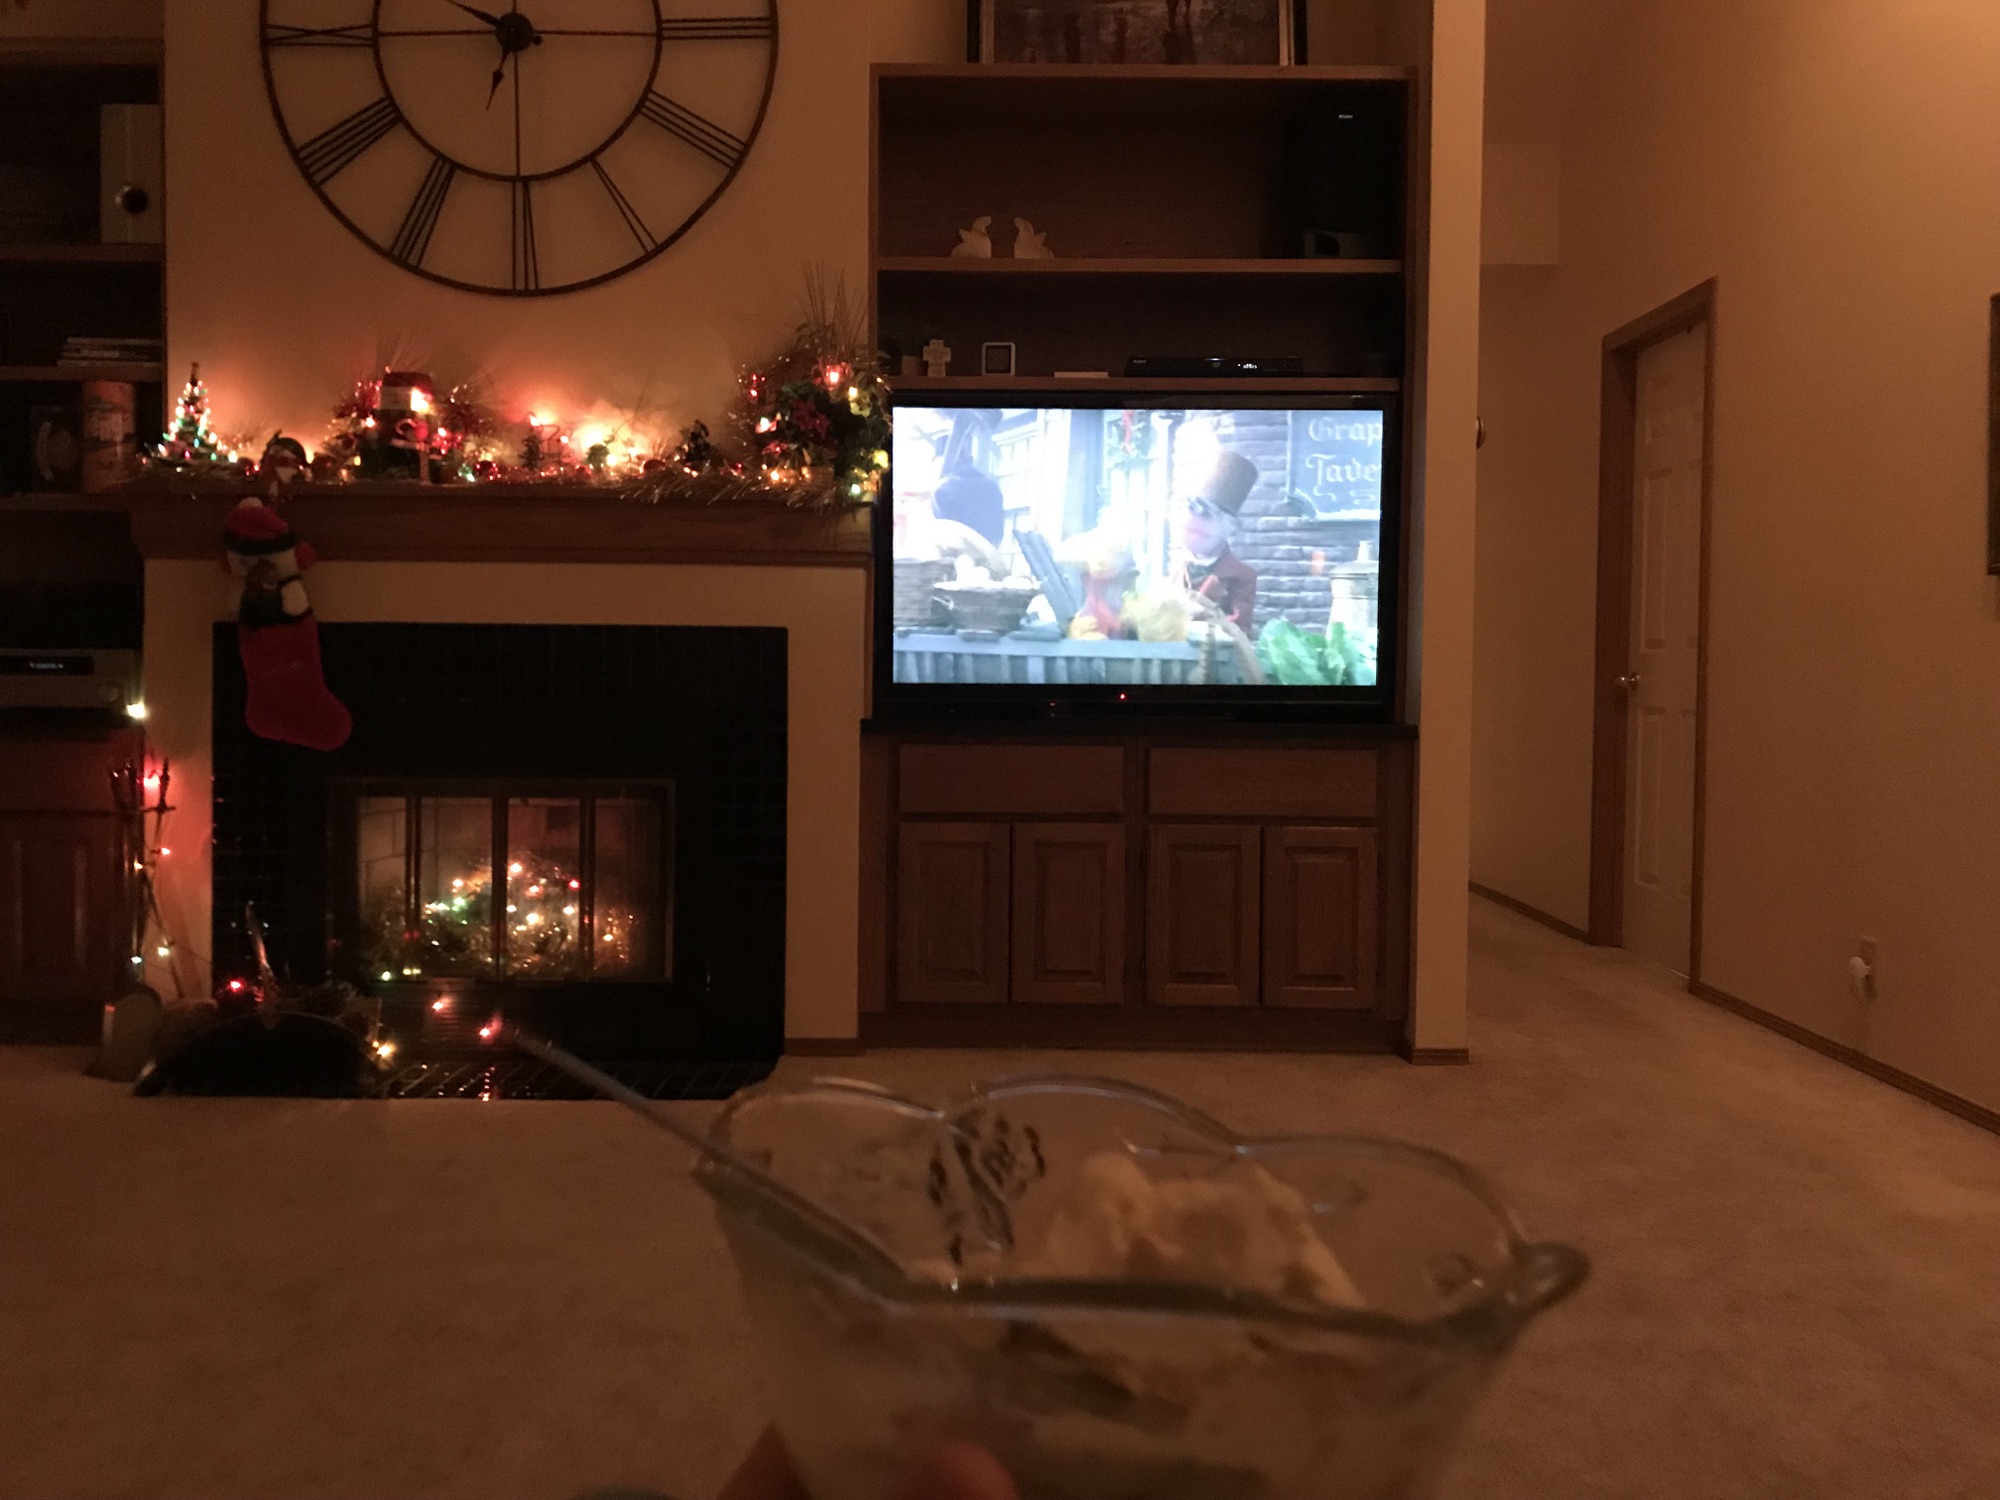 Watching a Christmas movie with ice cream